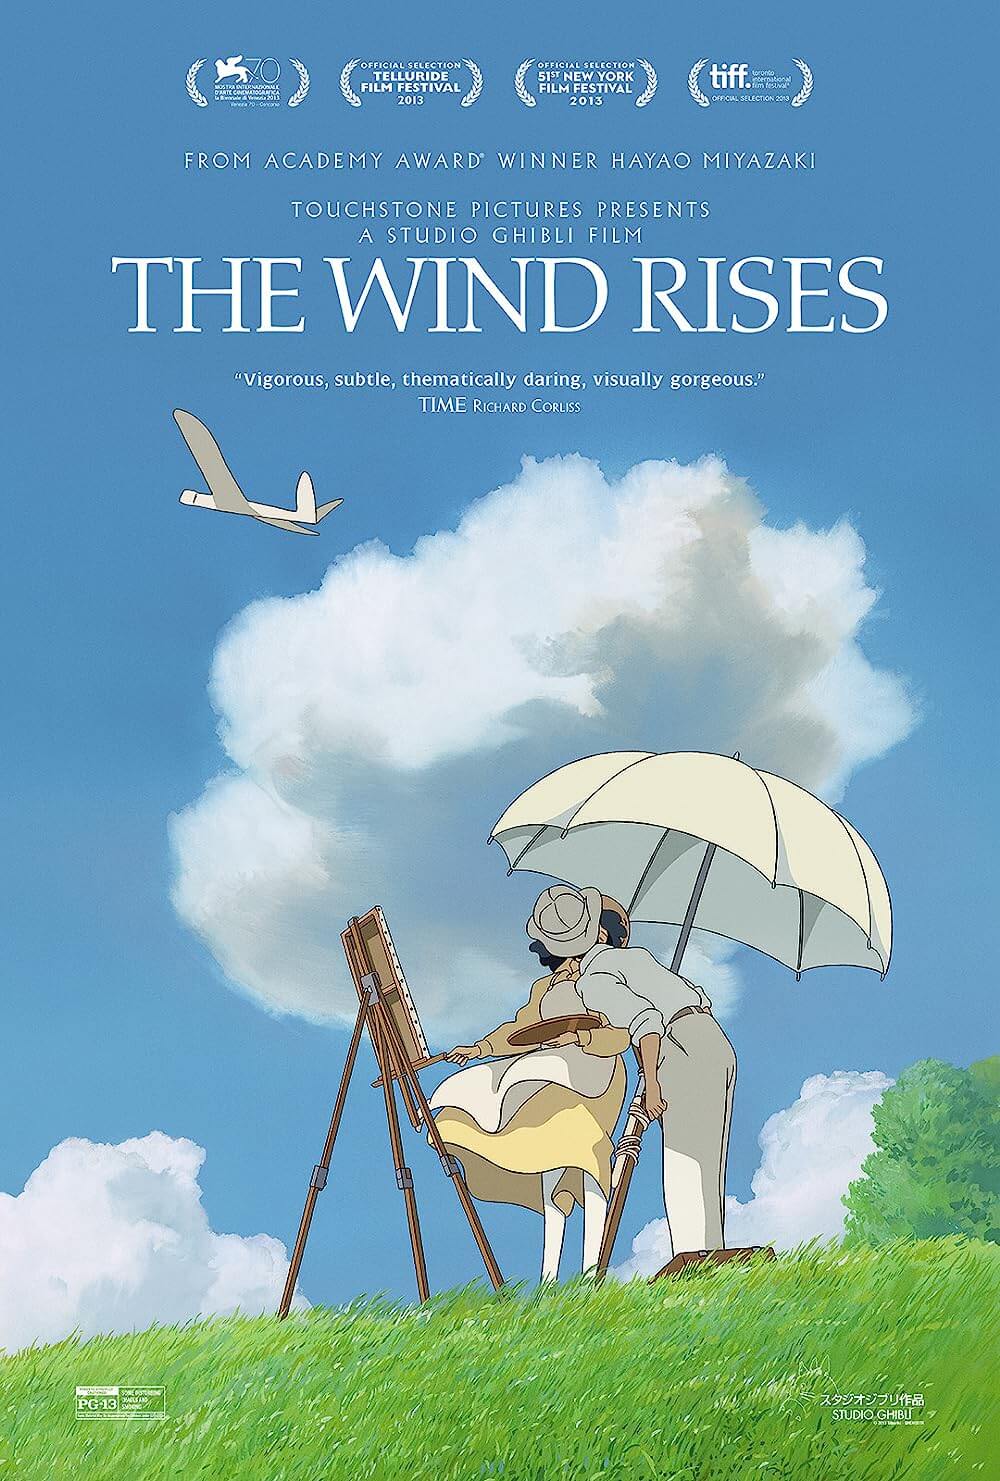 Watch The Wind Rises today, it's one of the best Studio Ghibli movies & romance tales. Recommended for 10+ year olds.